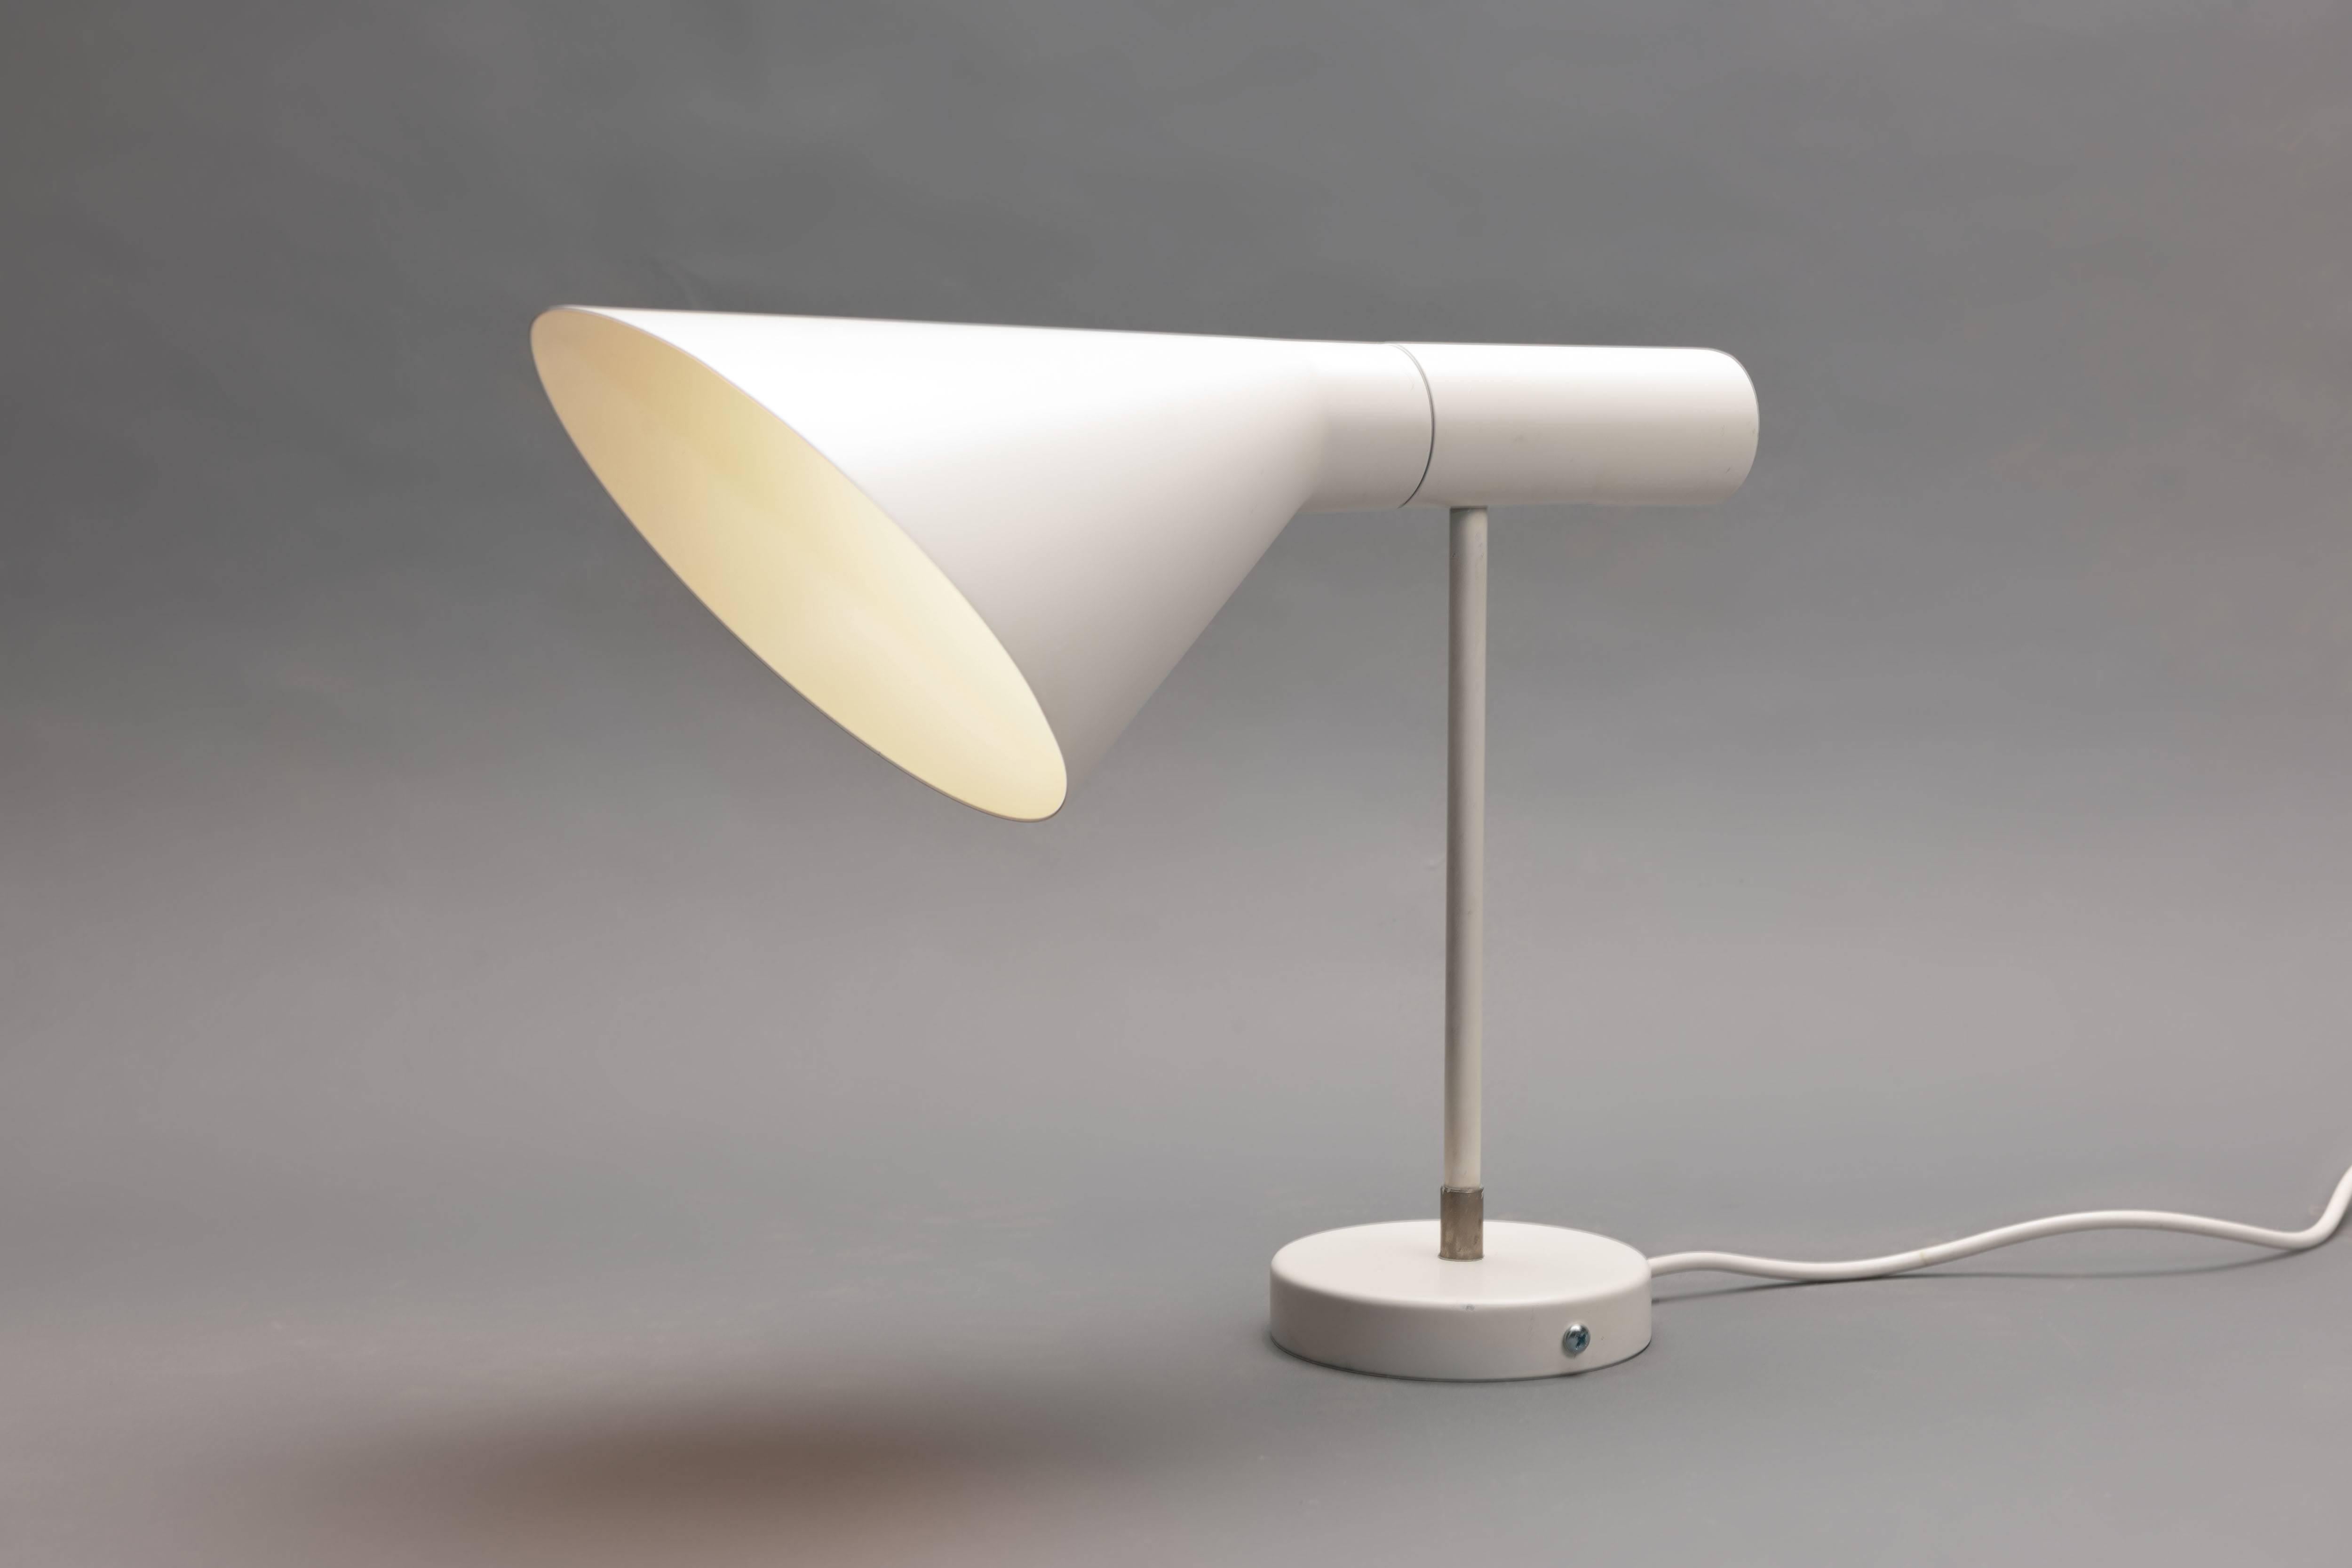 Early - older versions (these are larger sized) white 'Visor' / AJ wall lamp by Arne Jacobsen, originally designed in 1958 for the Sas Royal hotel in Copenhagen executed by Danish manufacturer Louis Poulsen. 
Measures: Depth 35 cm, length 30 cm,